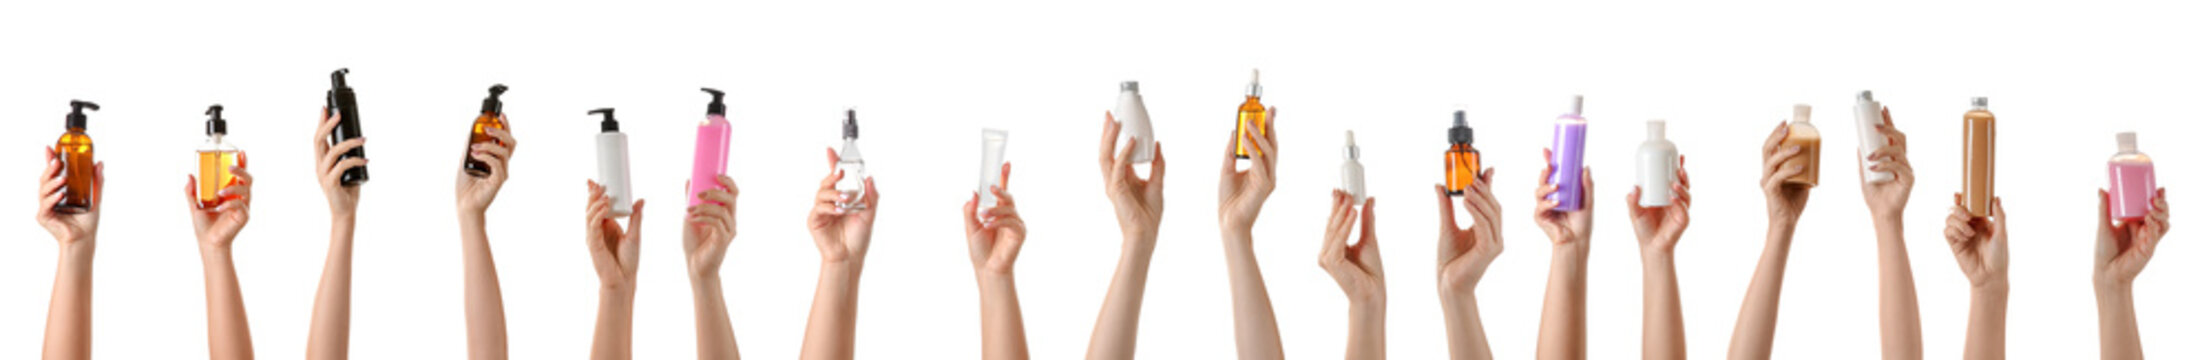 Female Hands With Different Cosmetic Products In Bottles On White Background